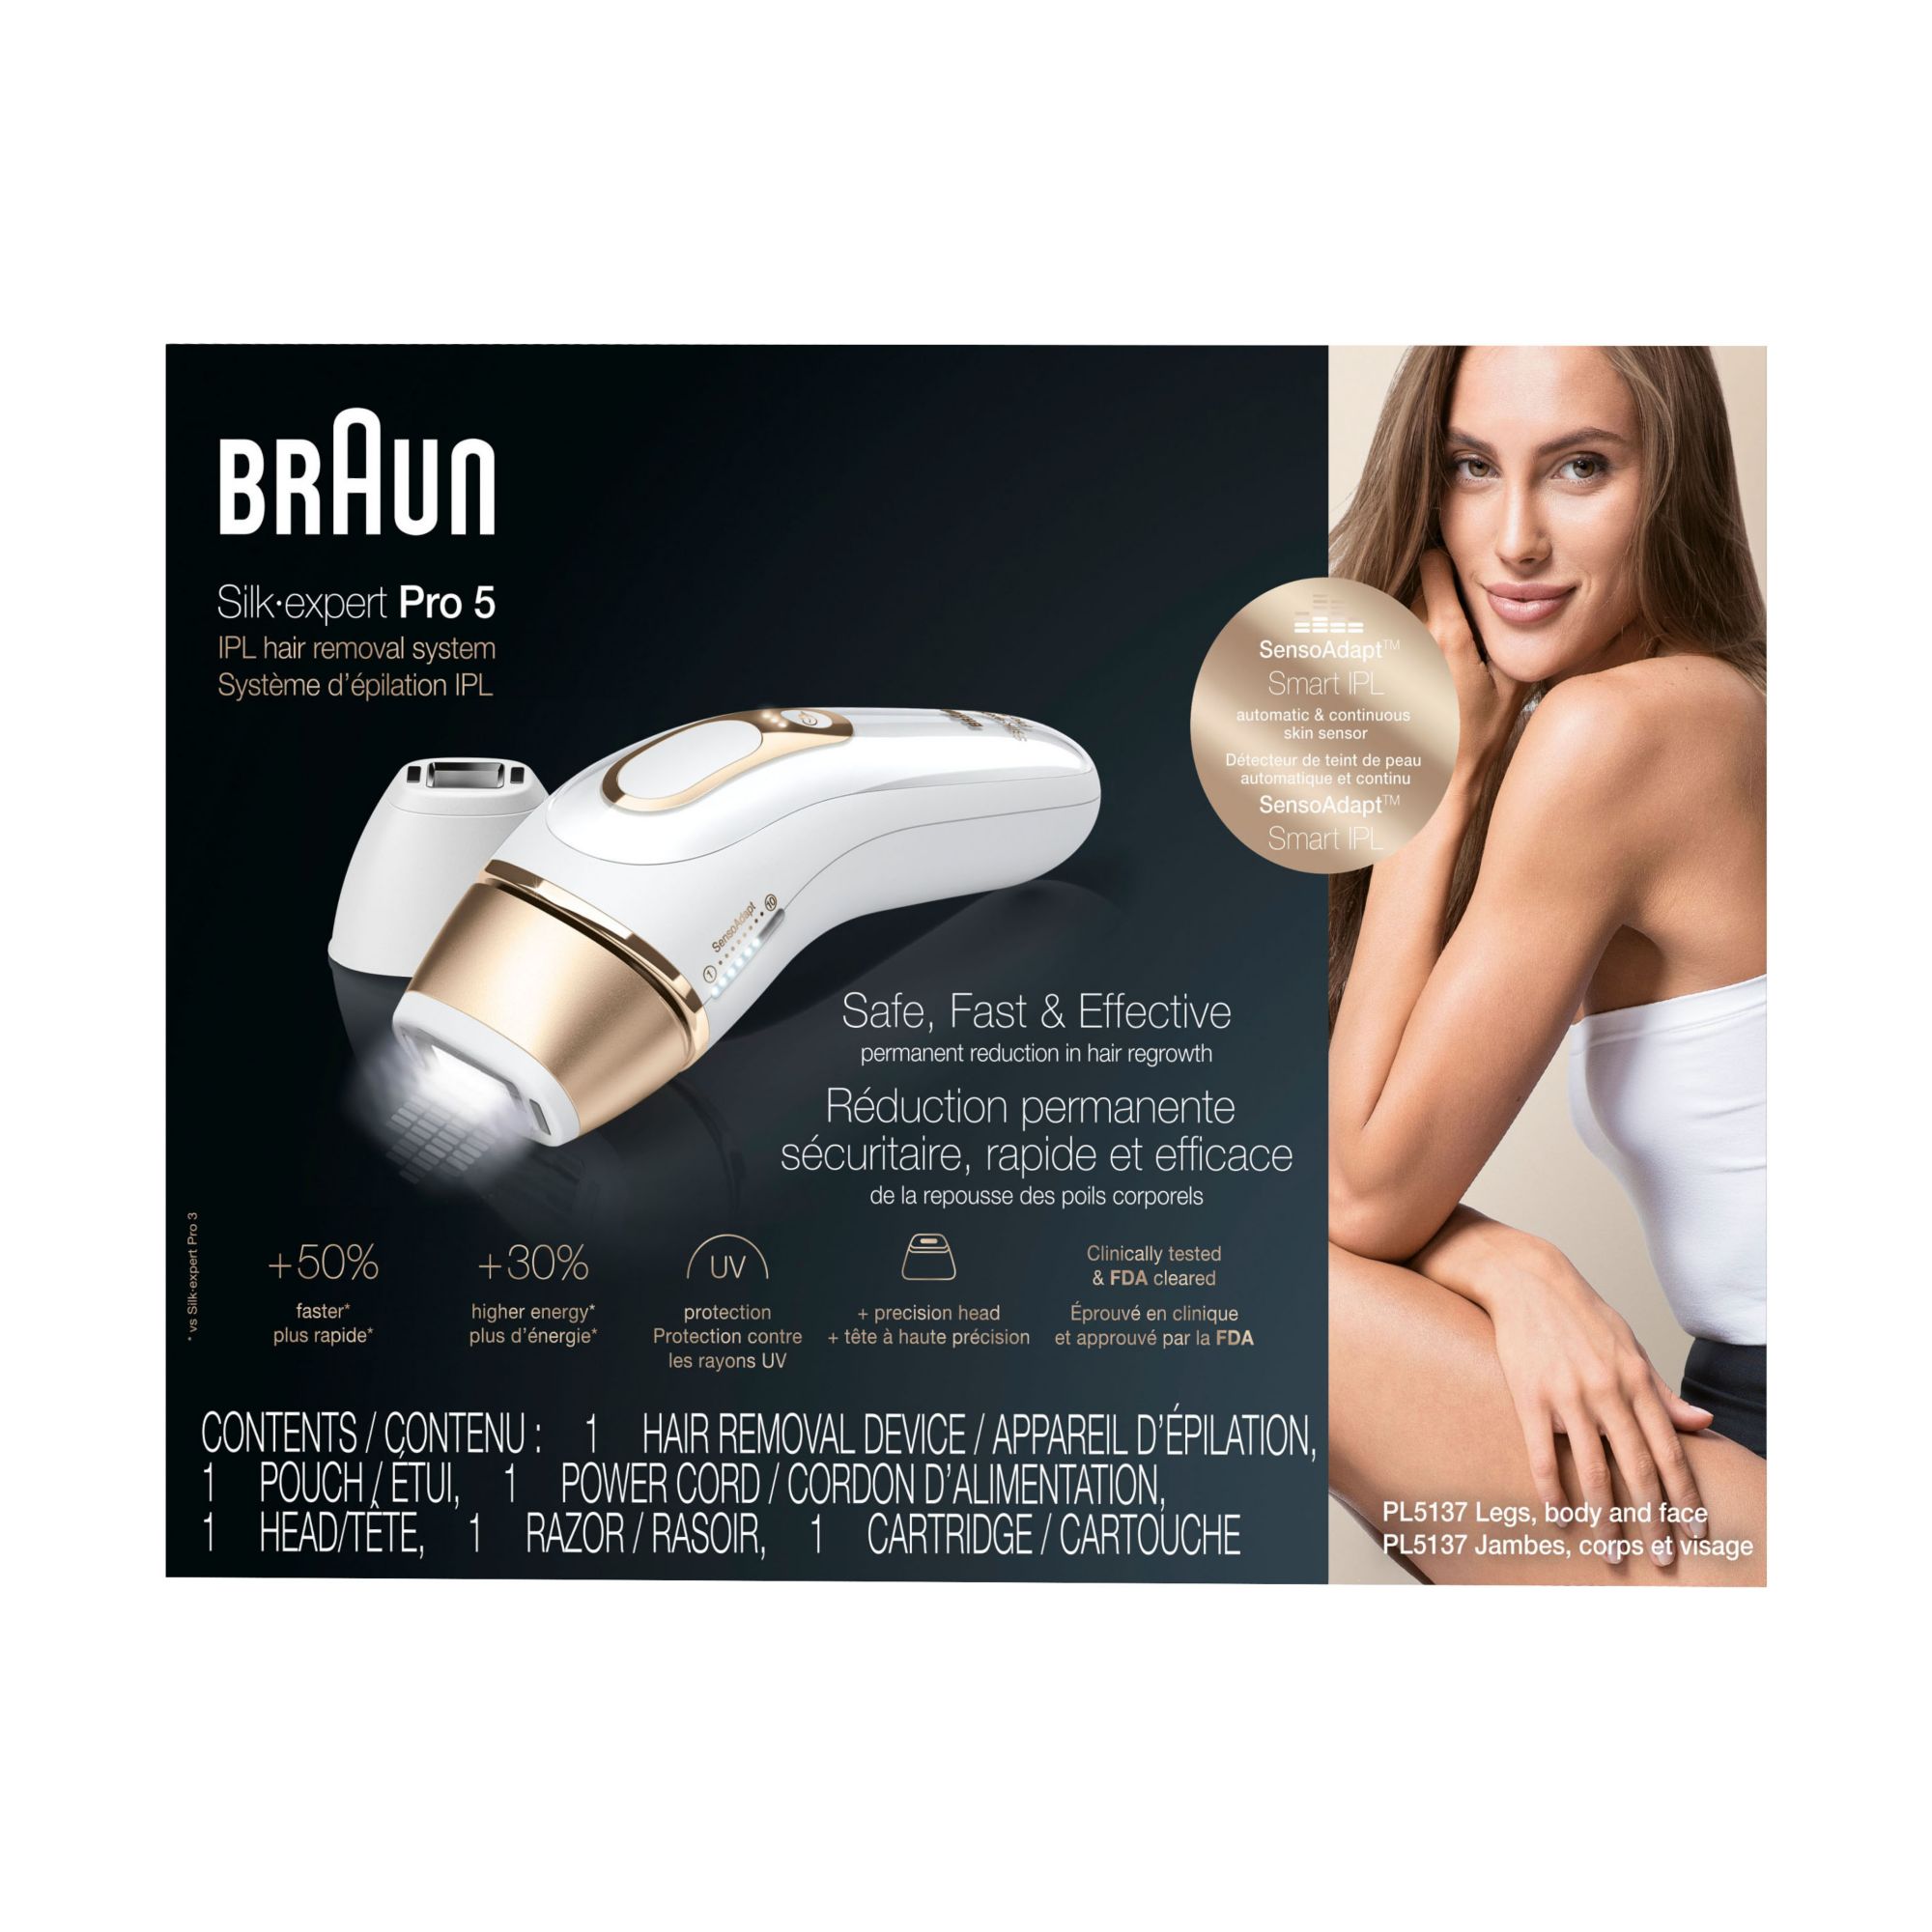 Braun IPL Long-Lasting Hair Removal for Women and Men, Silk Expert Pro 5  PL5137 with Venus Swirl Razor, Long-lasting Reduction in Hair Regrowth for  Body & Face, Corded